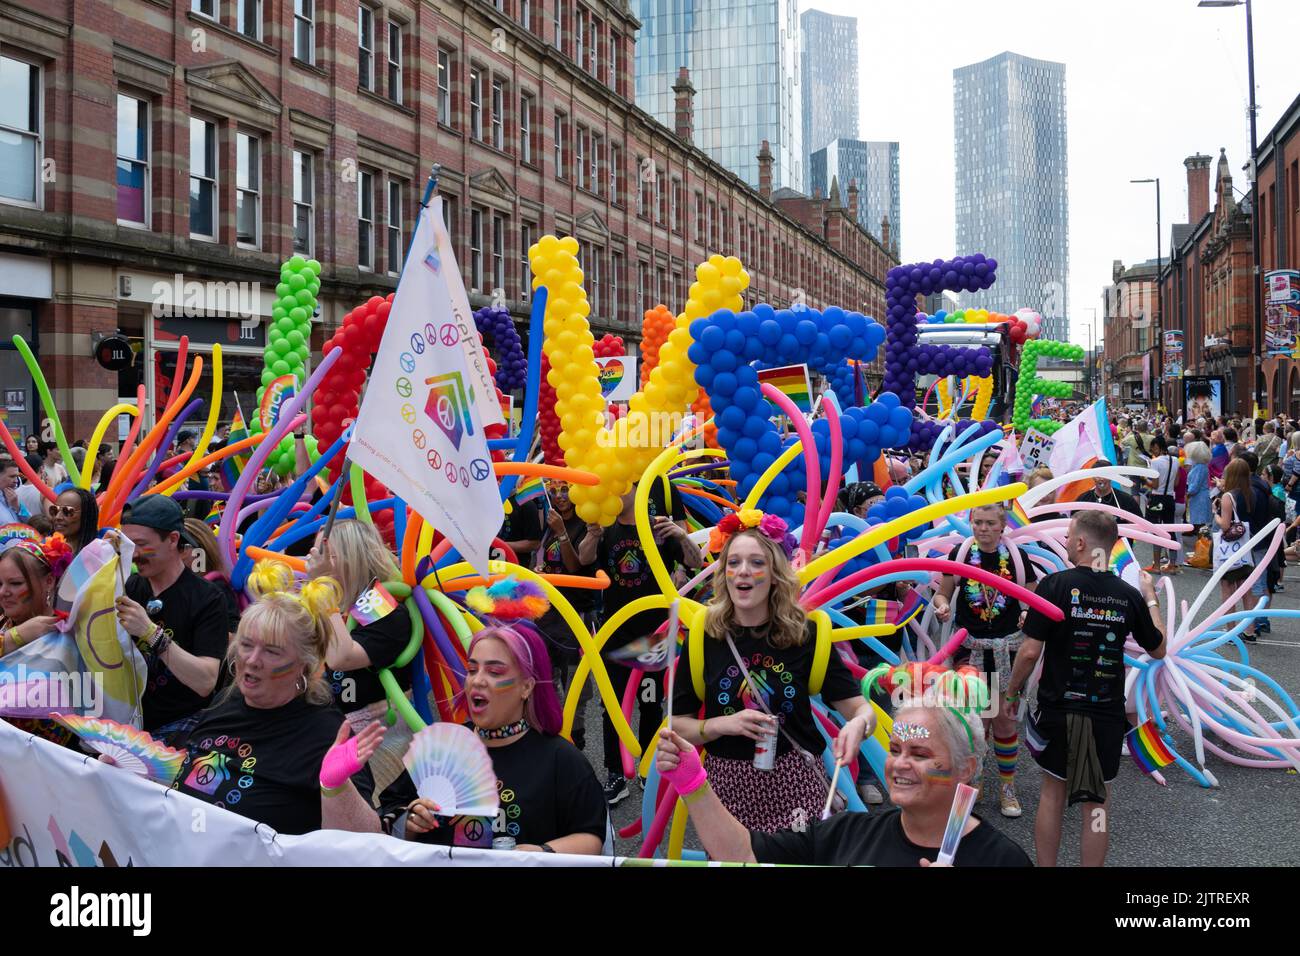 Manchester Pride parade. House Proud lgbt social housing group. Theme March for Peace. Stock Photo